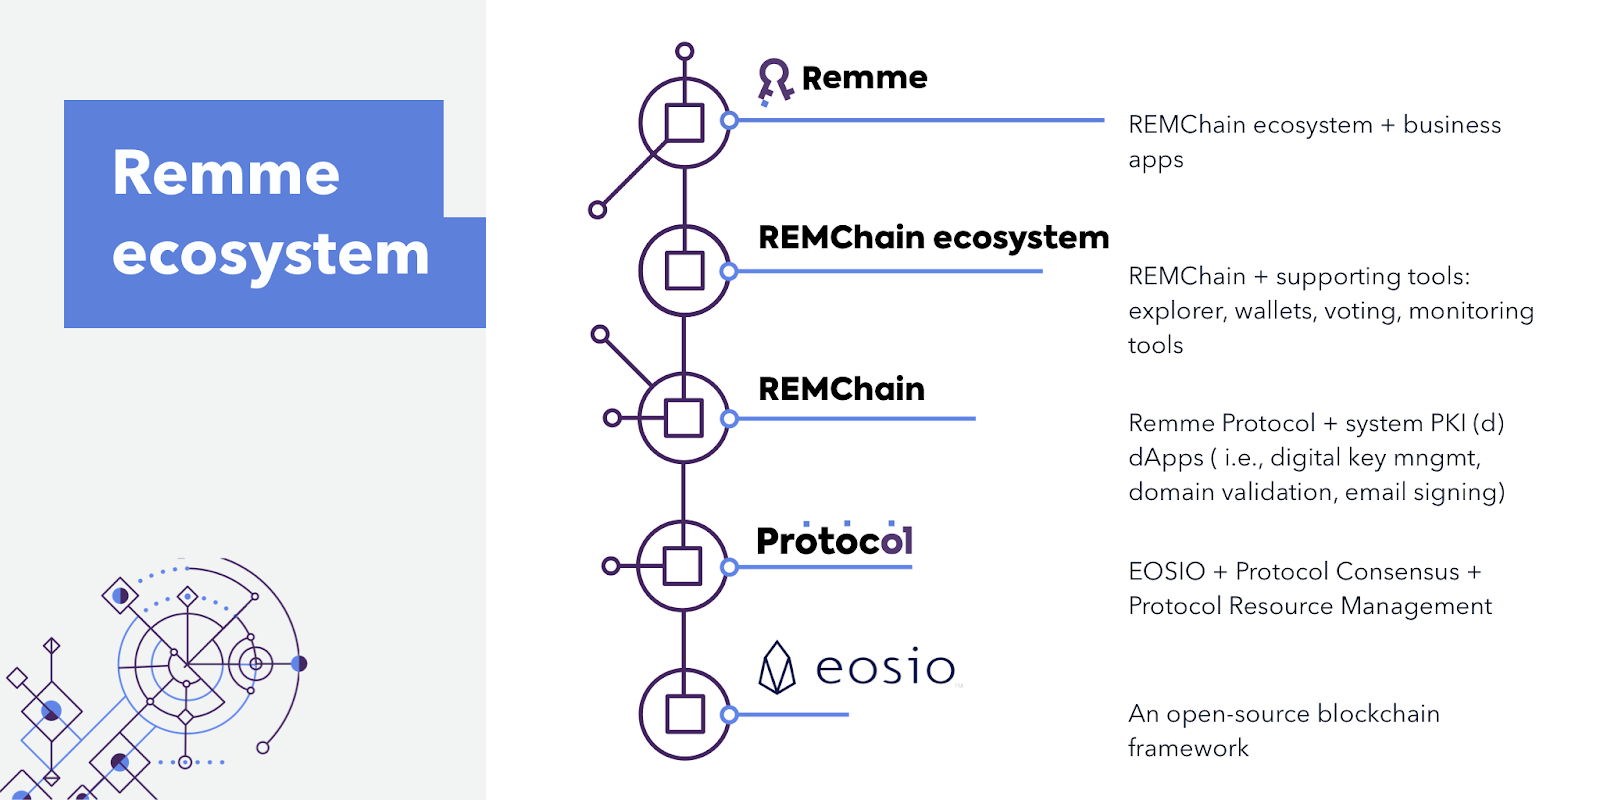 A hierarchical view of the Remme ecosystem.